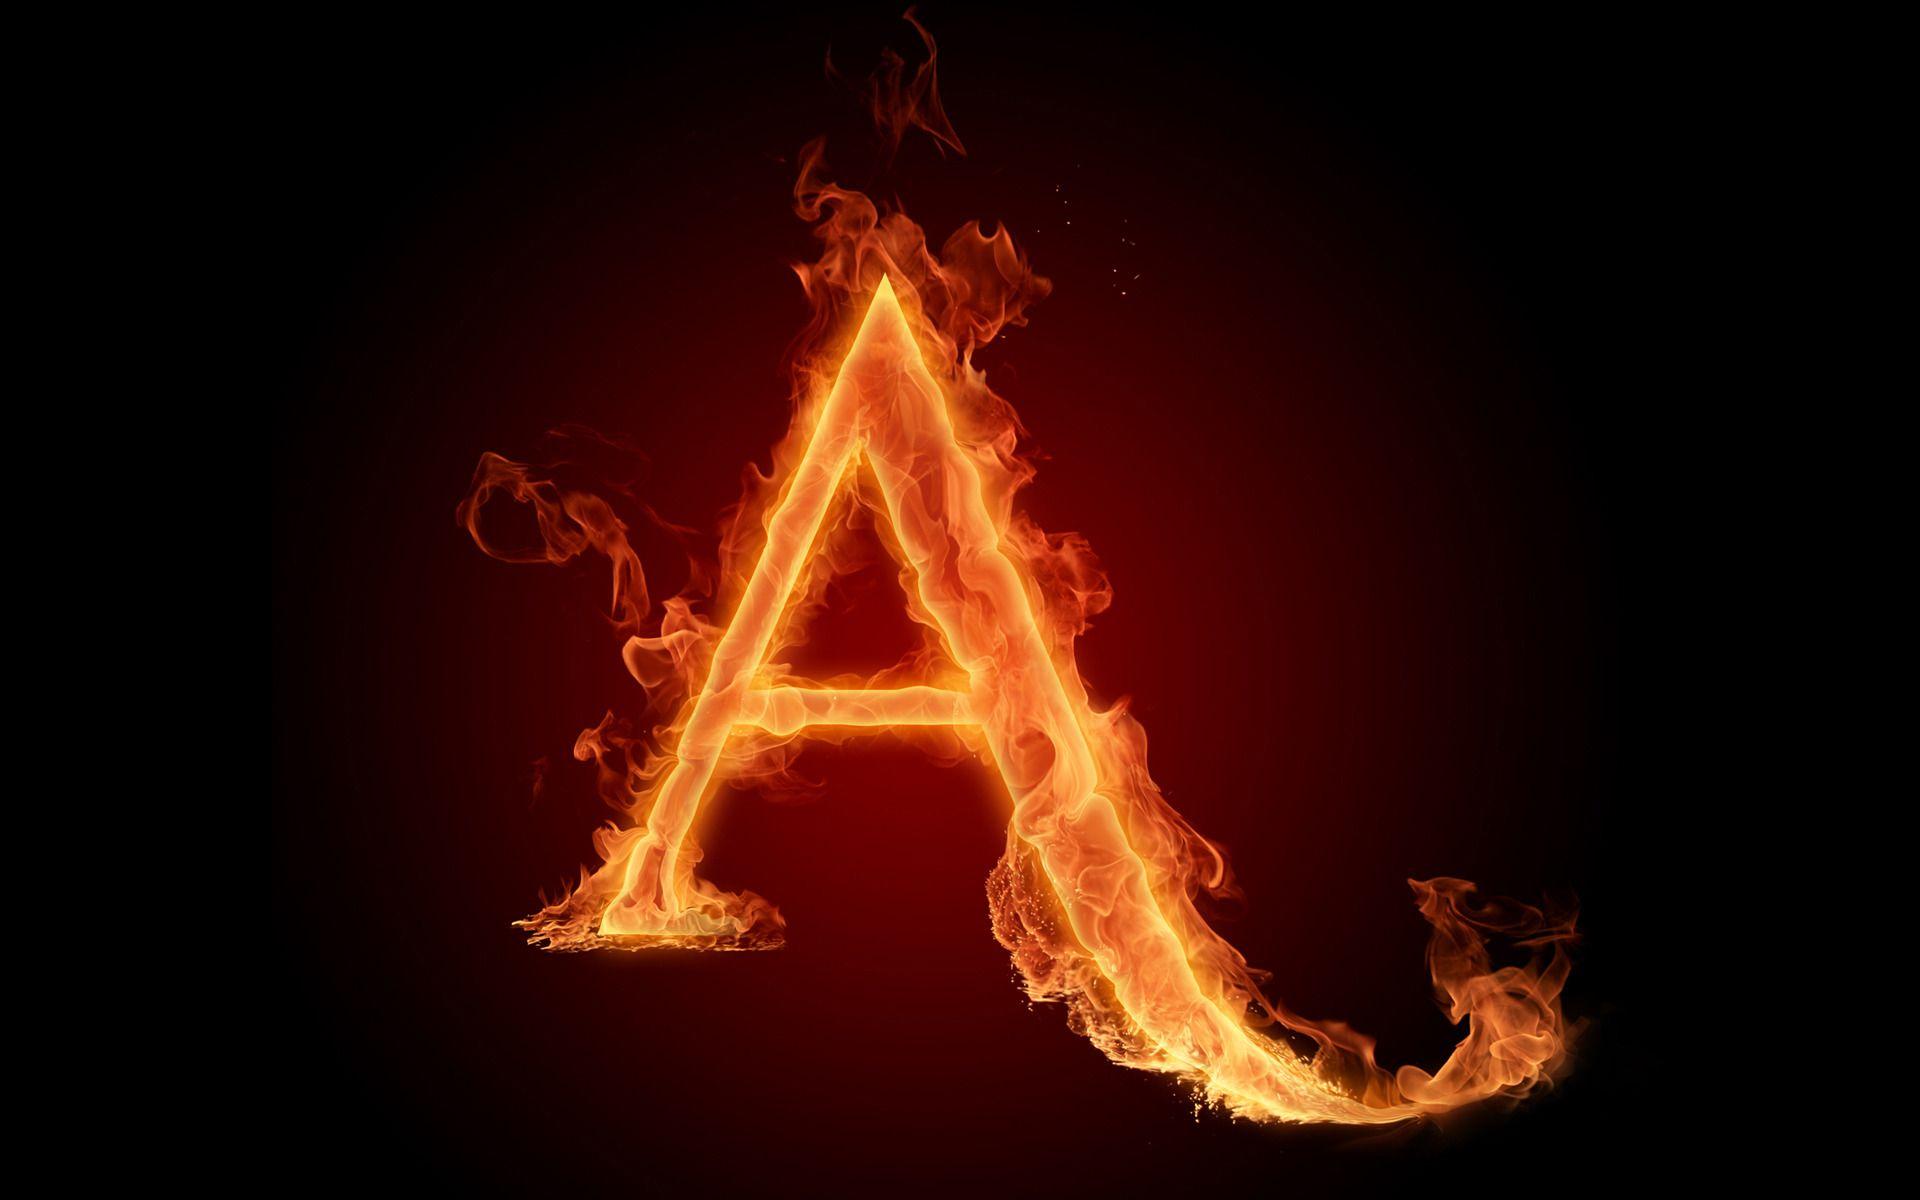 HD Wallpaper The fiery English alphabet picture A. Lettres